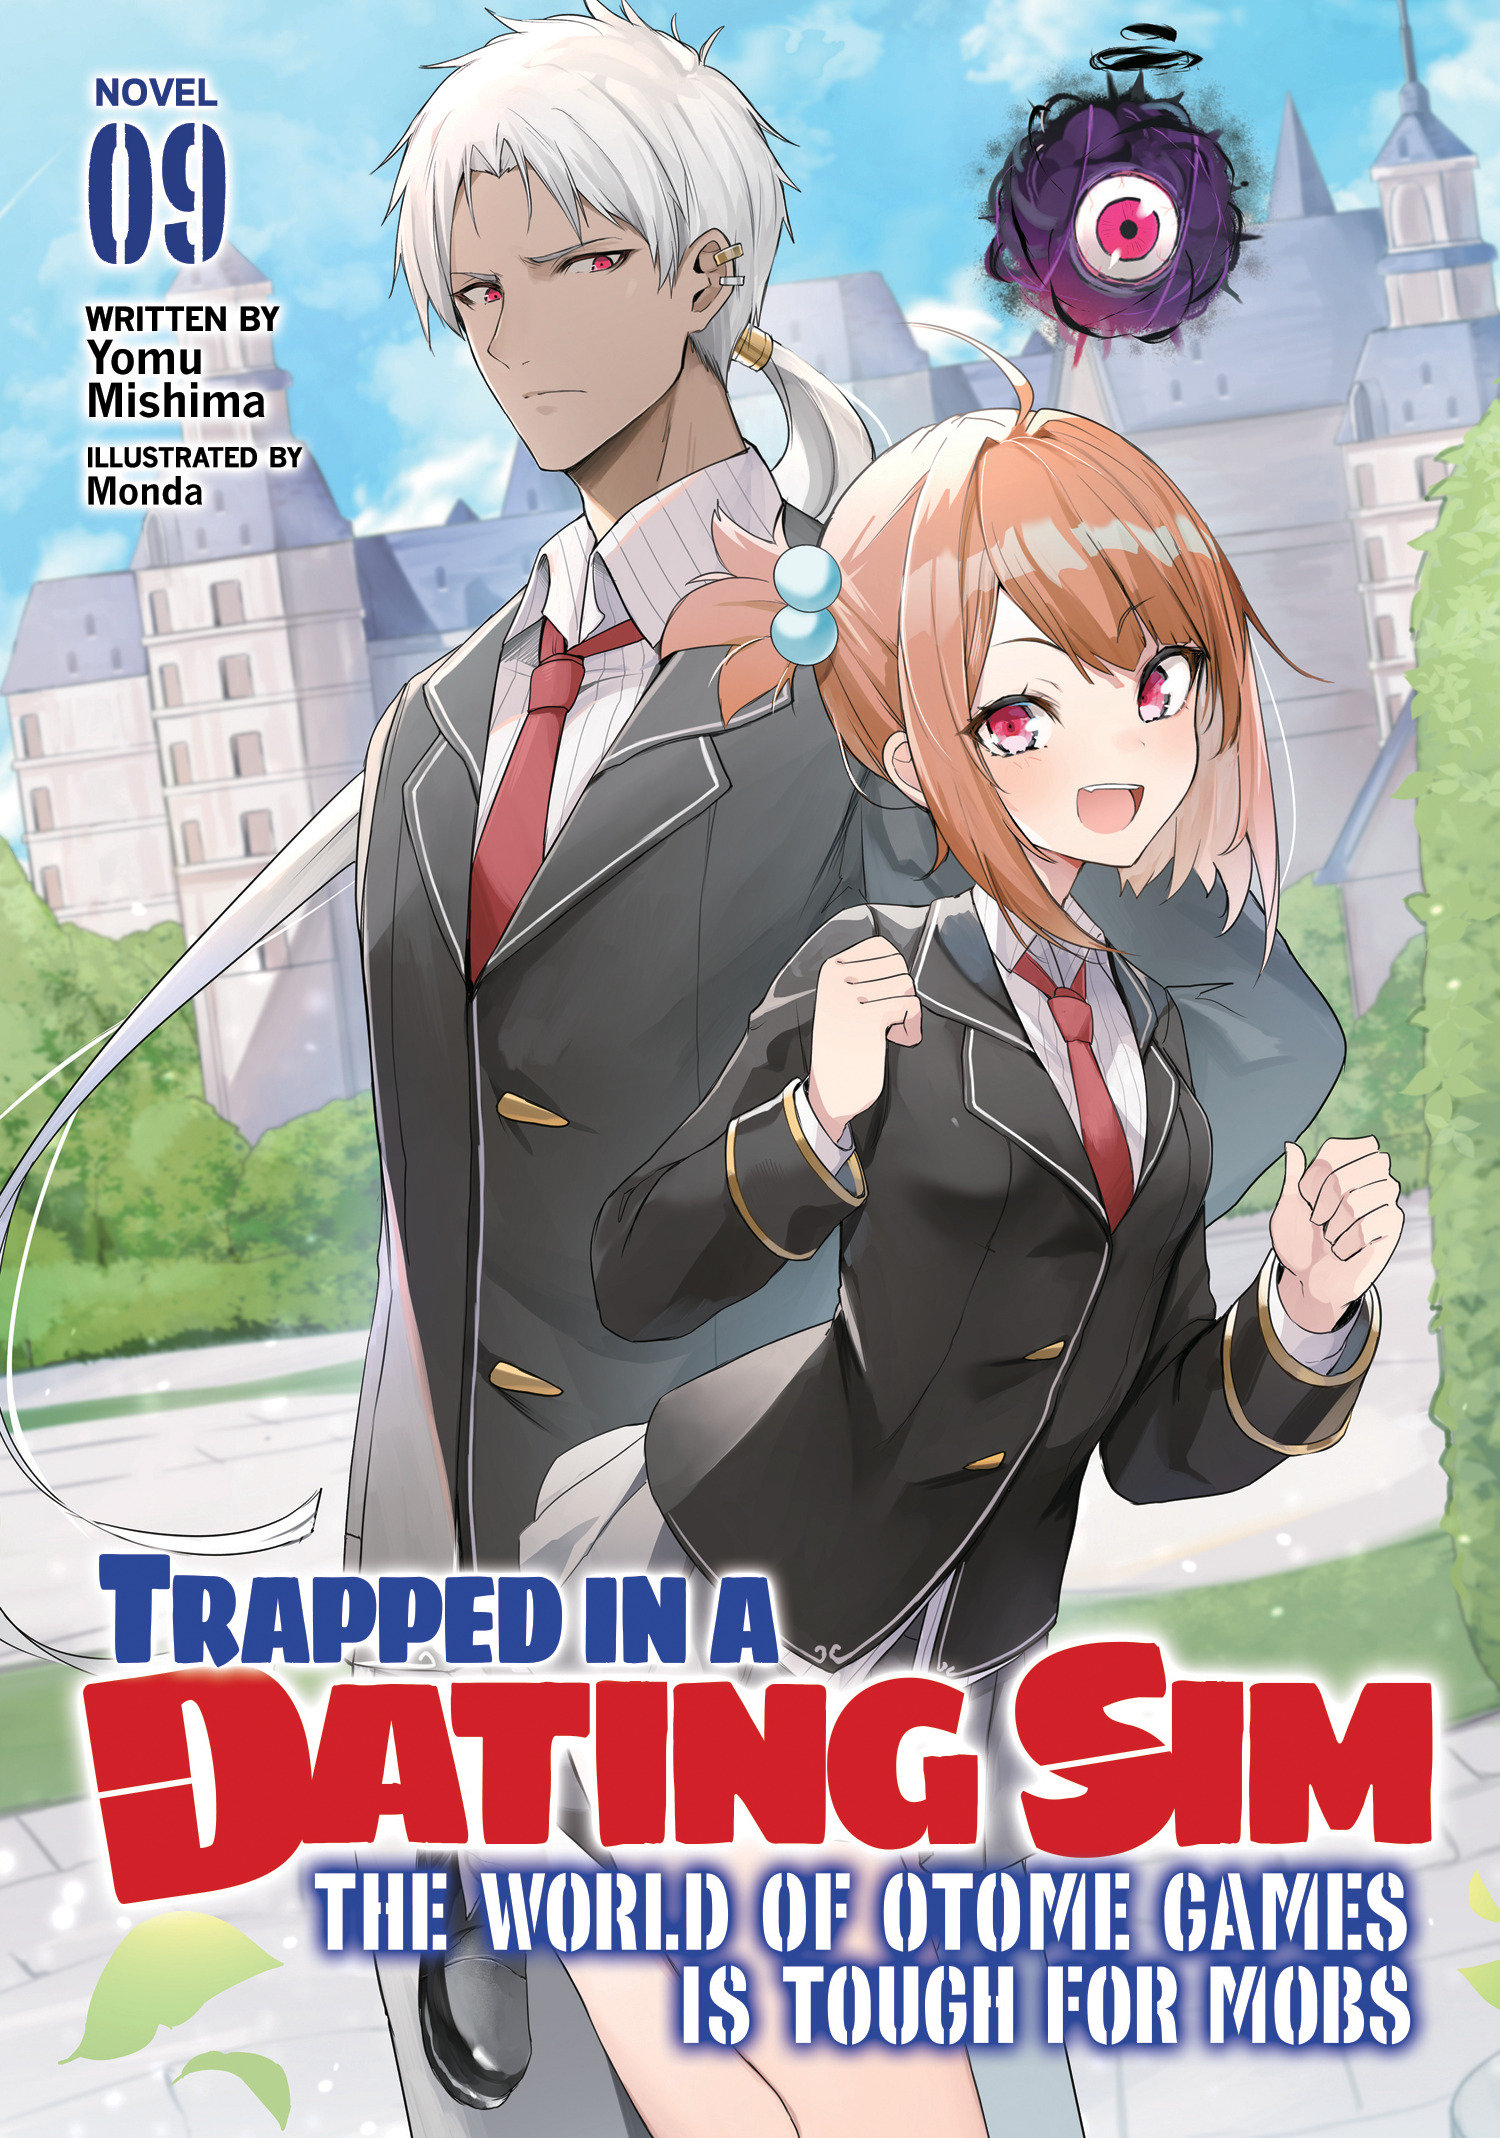 Trapped in a Dating Sim: The World of Otome Games is Tough for Mobs Light Novel Volume 9